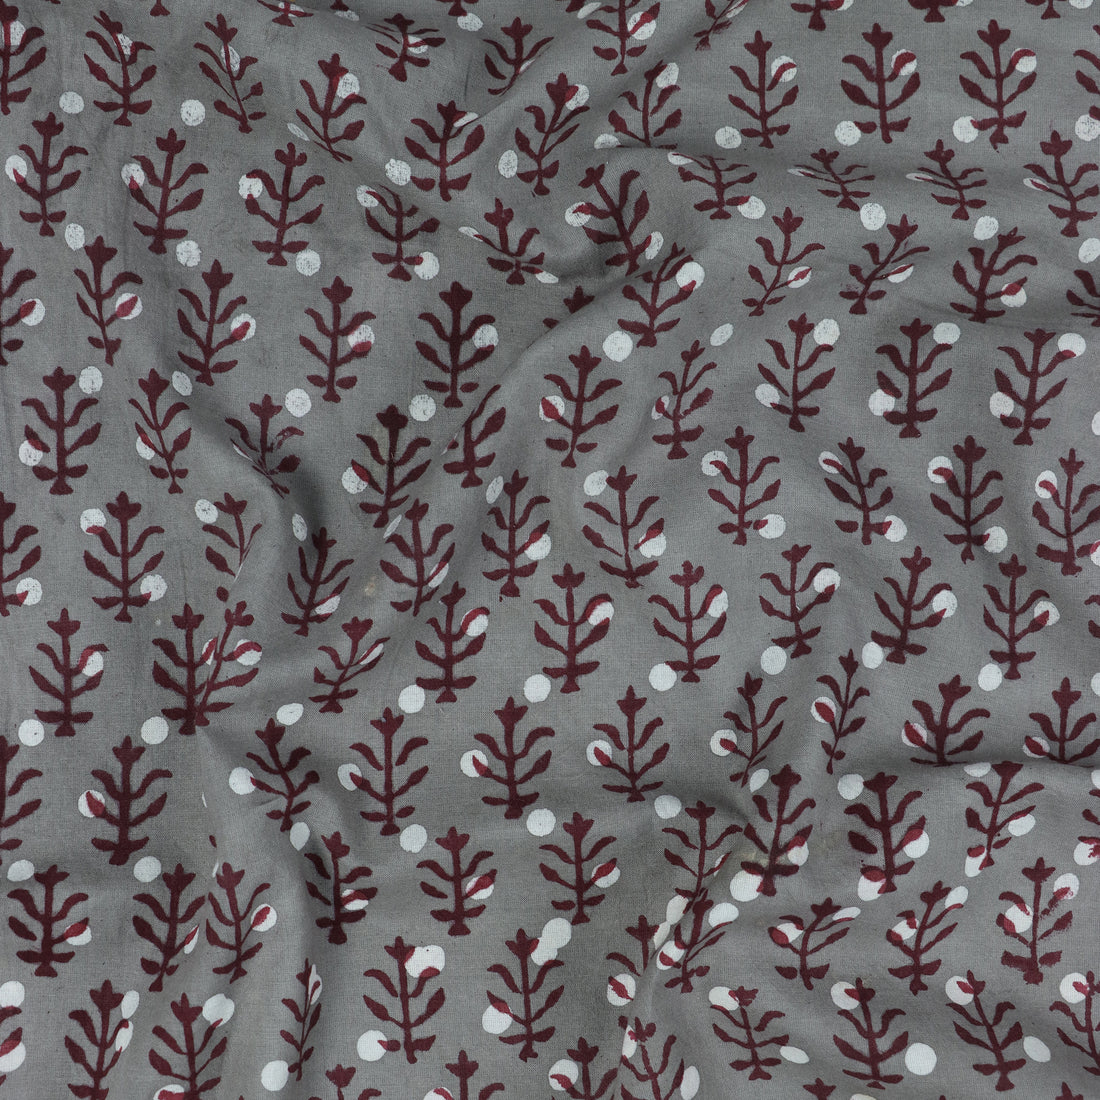 Hand Block Red Leaf Printed Cotton Fabric For Dress Material Online